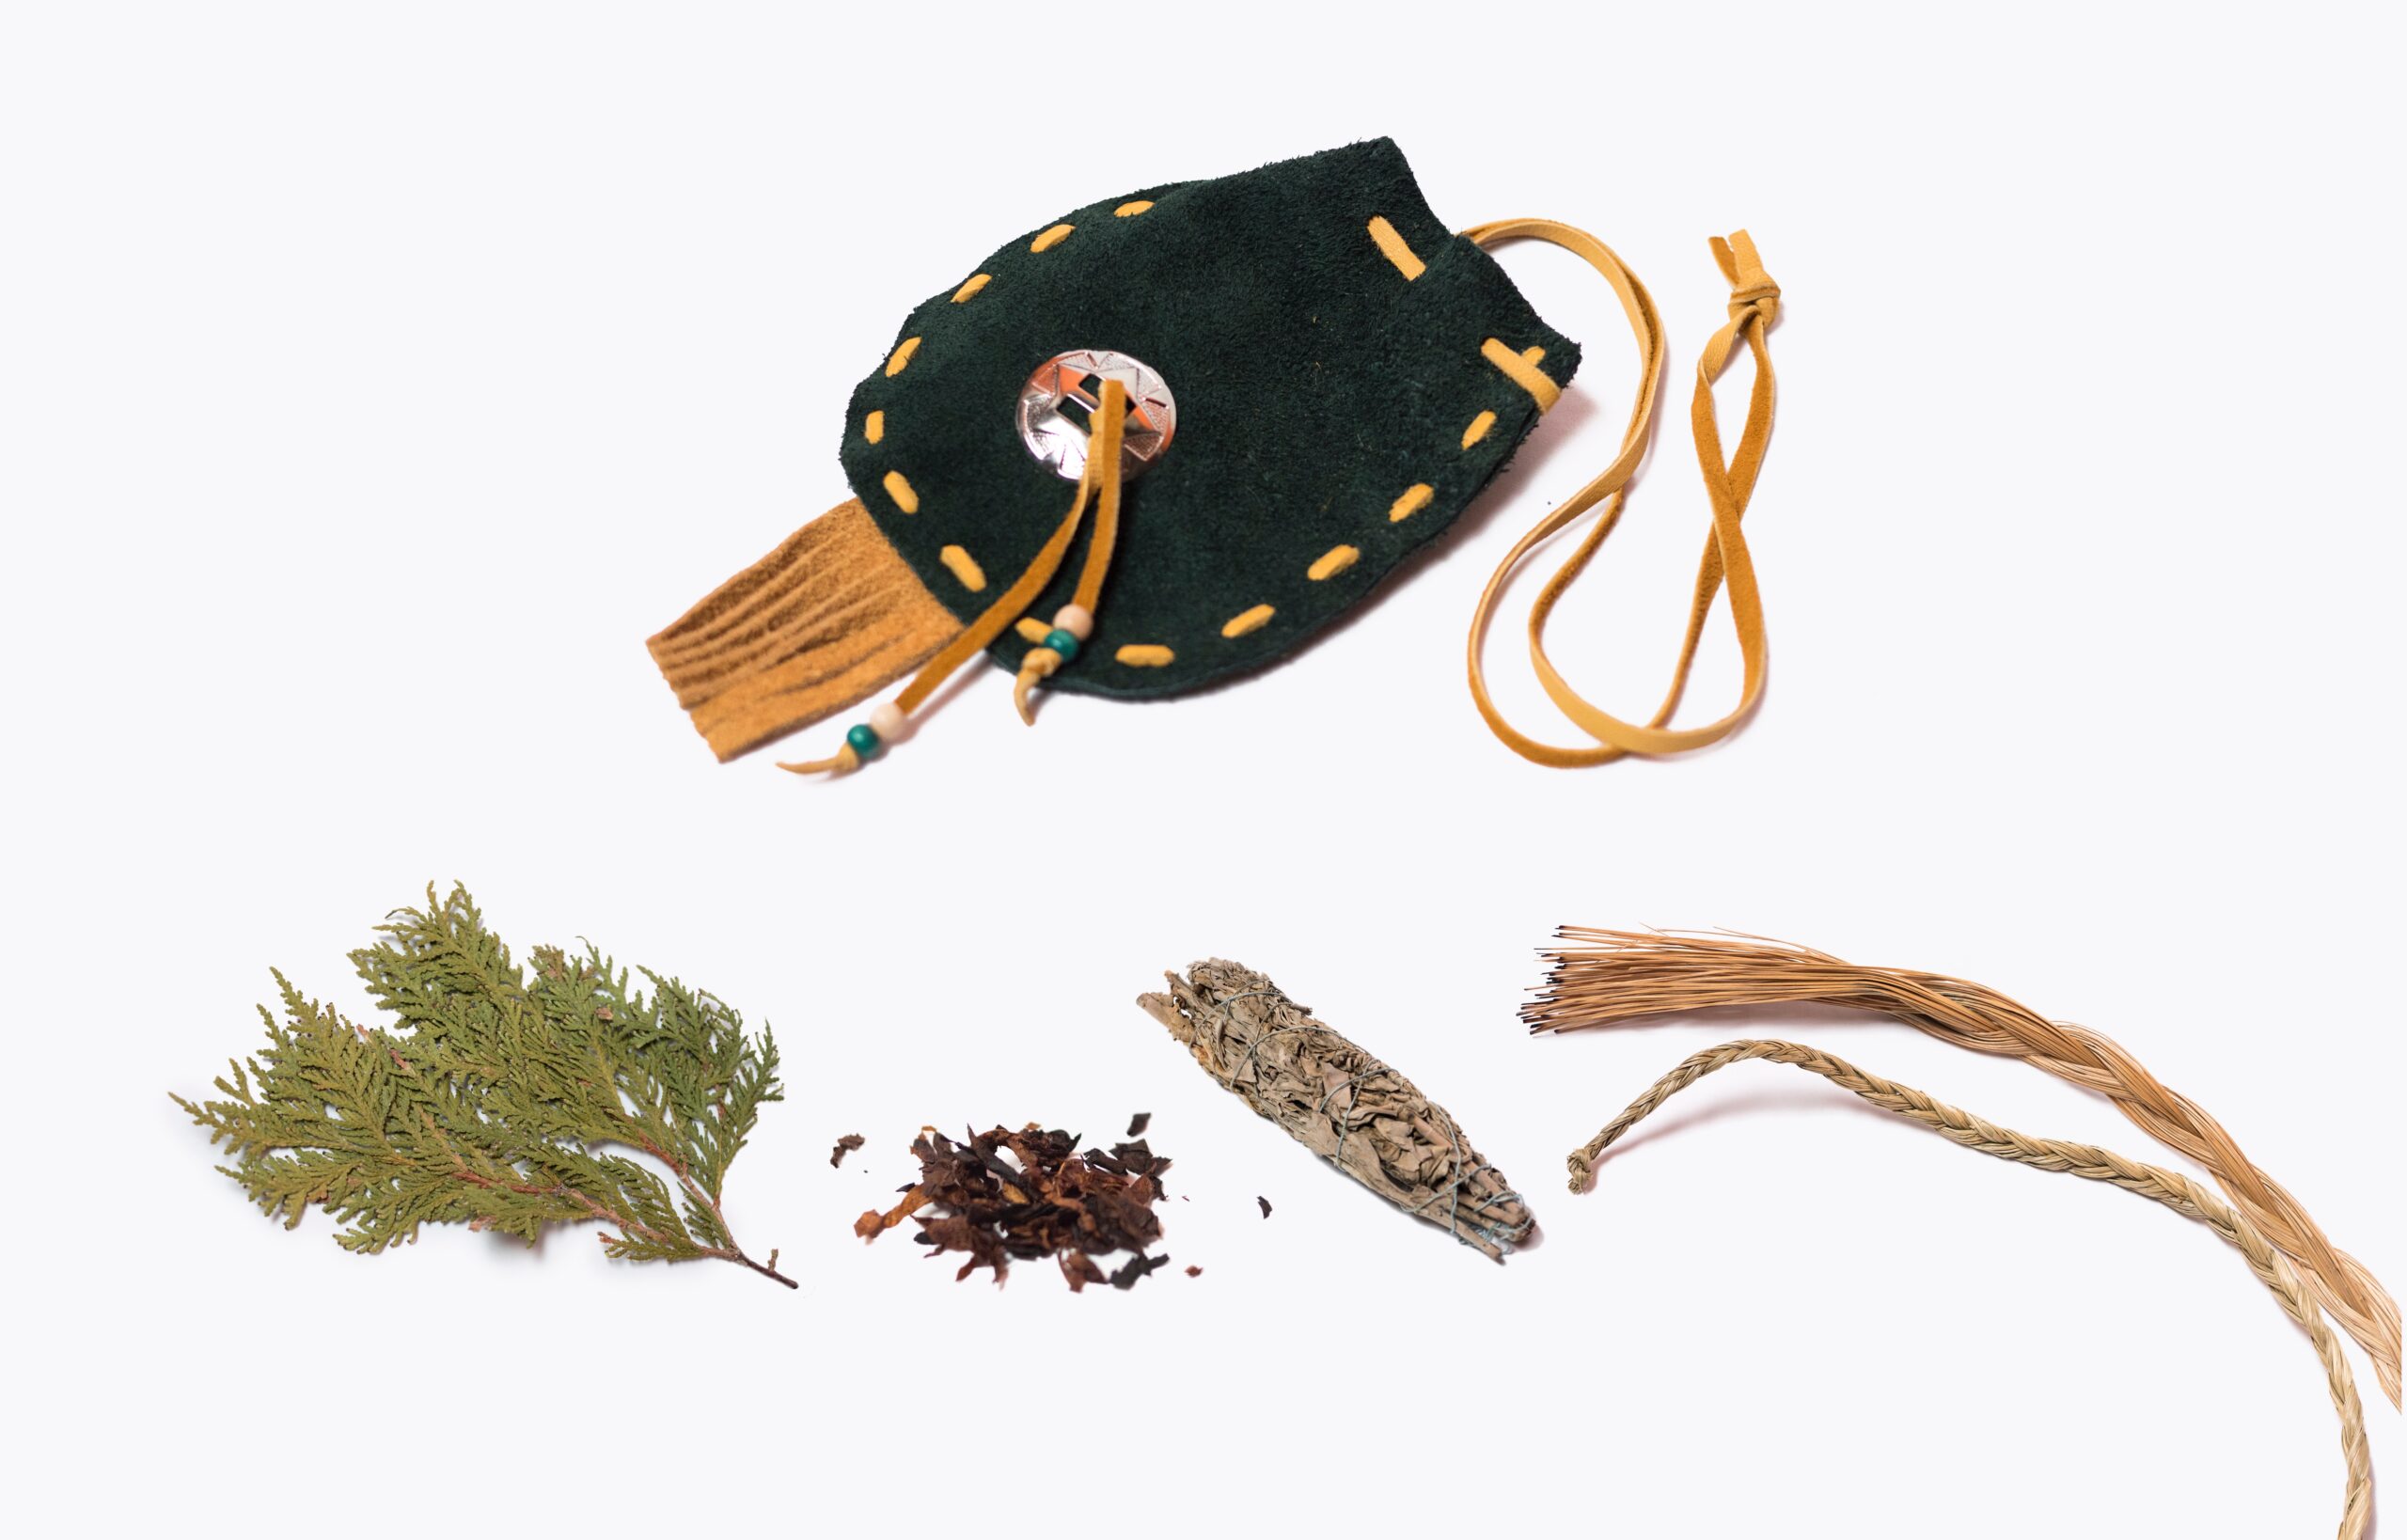 Medicine pouches are personal to the owner. Many often contain at least one sacred medicine. How many of these sacred medicines can you identify?